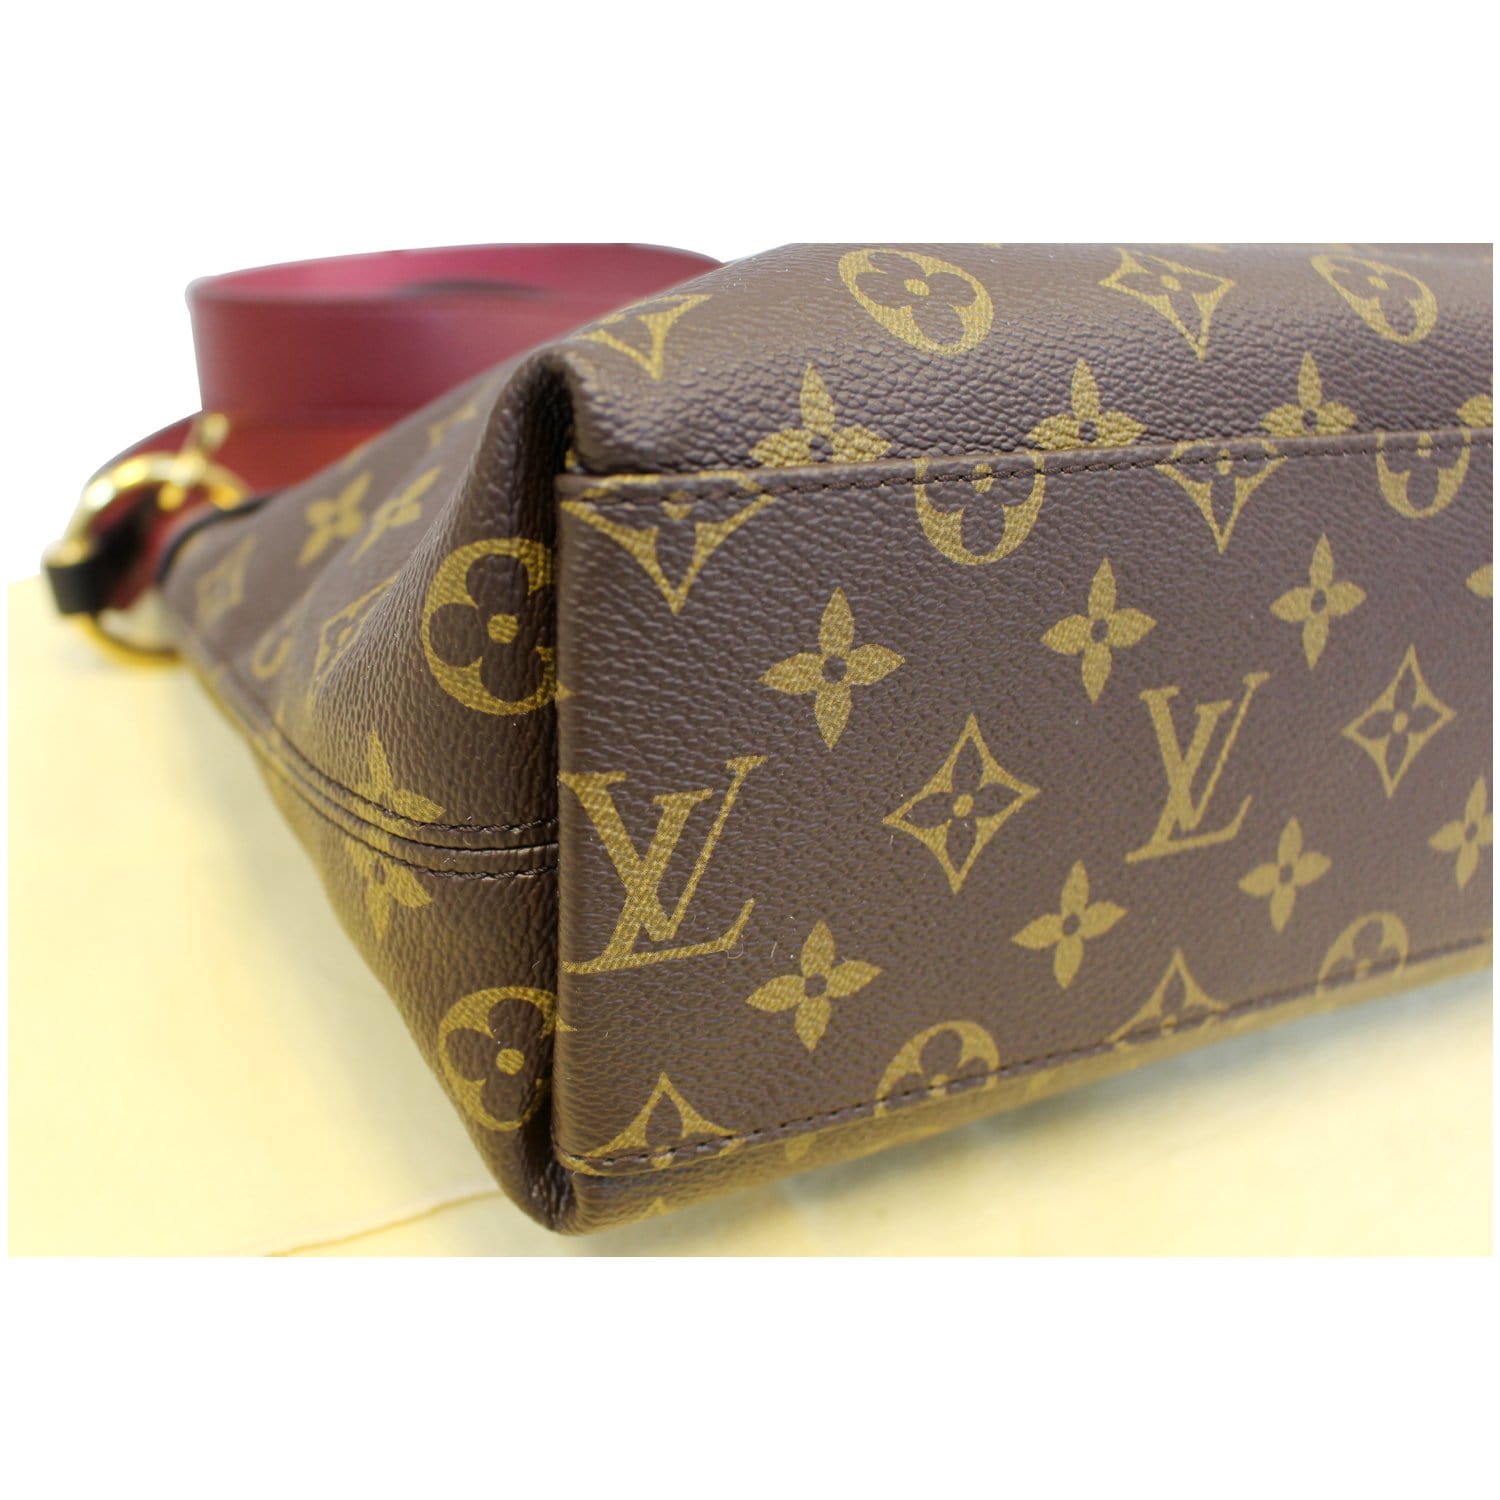 Tuileries Besace Monogram Canvas in WOMEN's HANDBAGS collections by Louis  Vuitton